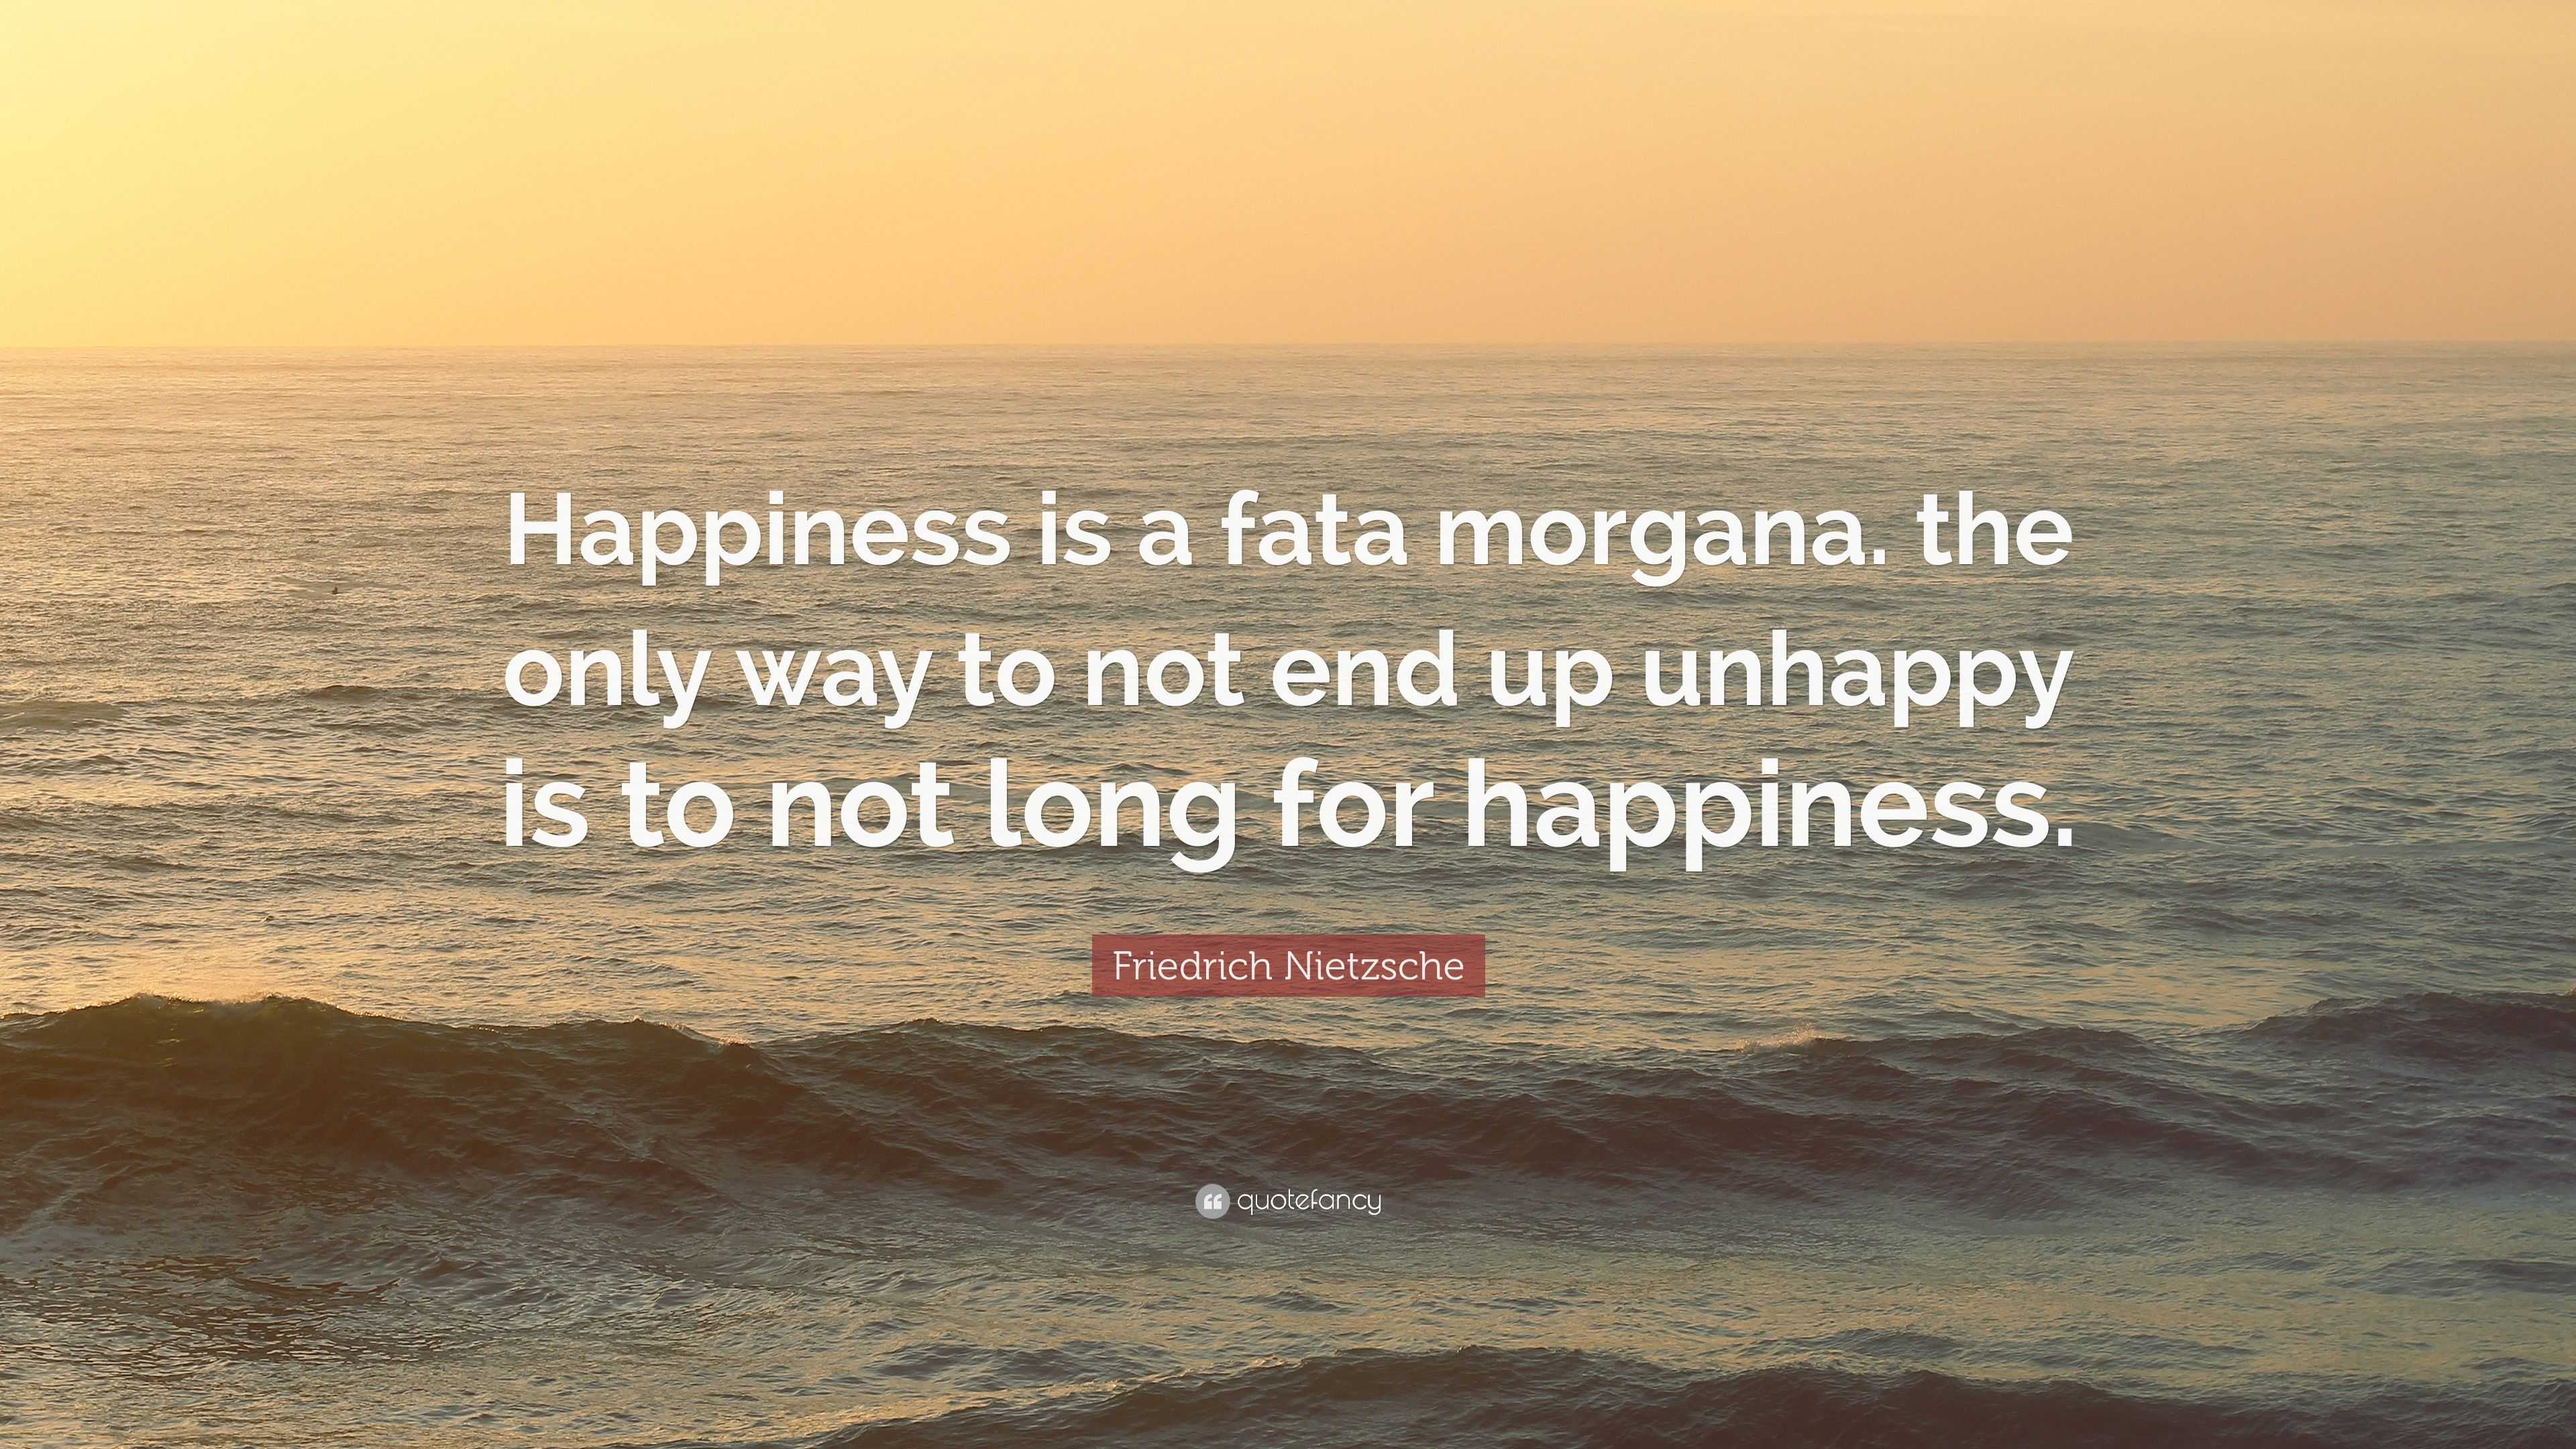 Friedrich Nietzsche Quote: “Happiness is a fata morgana. the only way